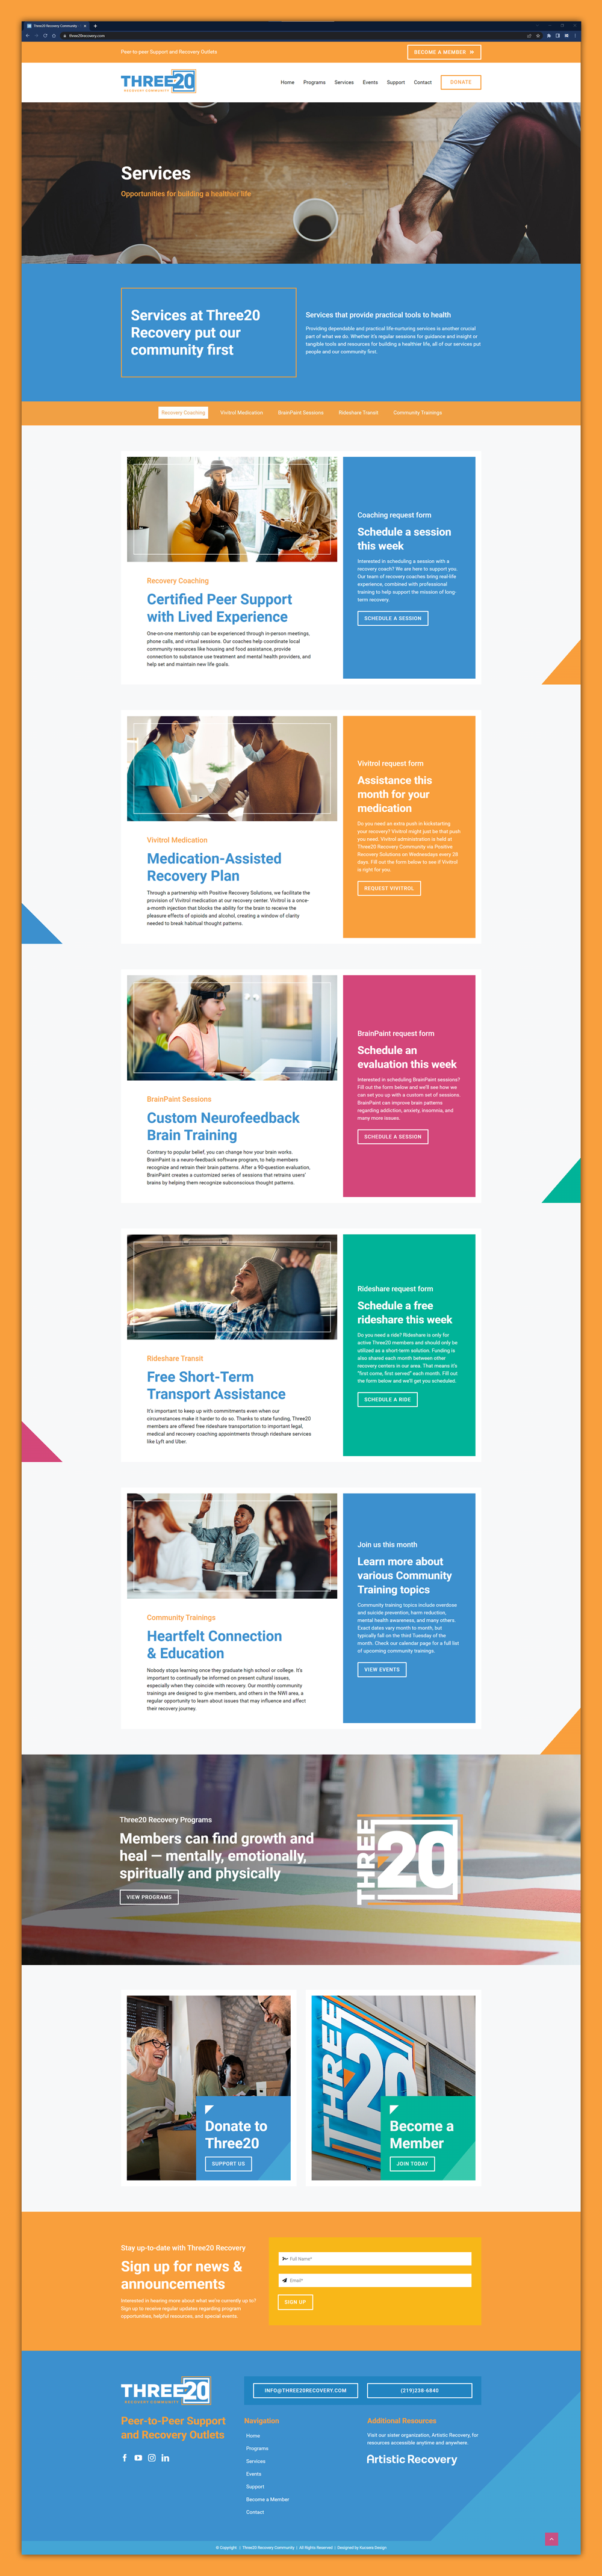 Three20 Recovery Community website design for services page